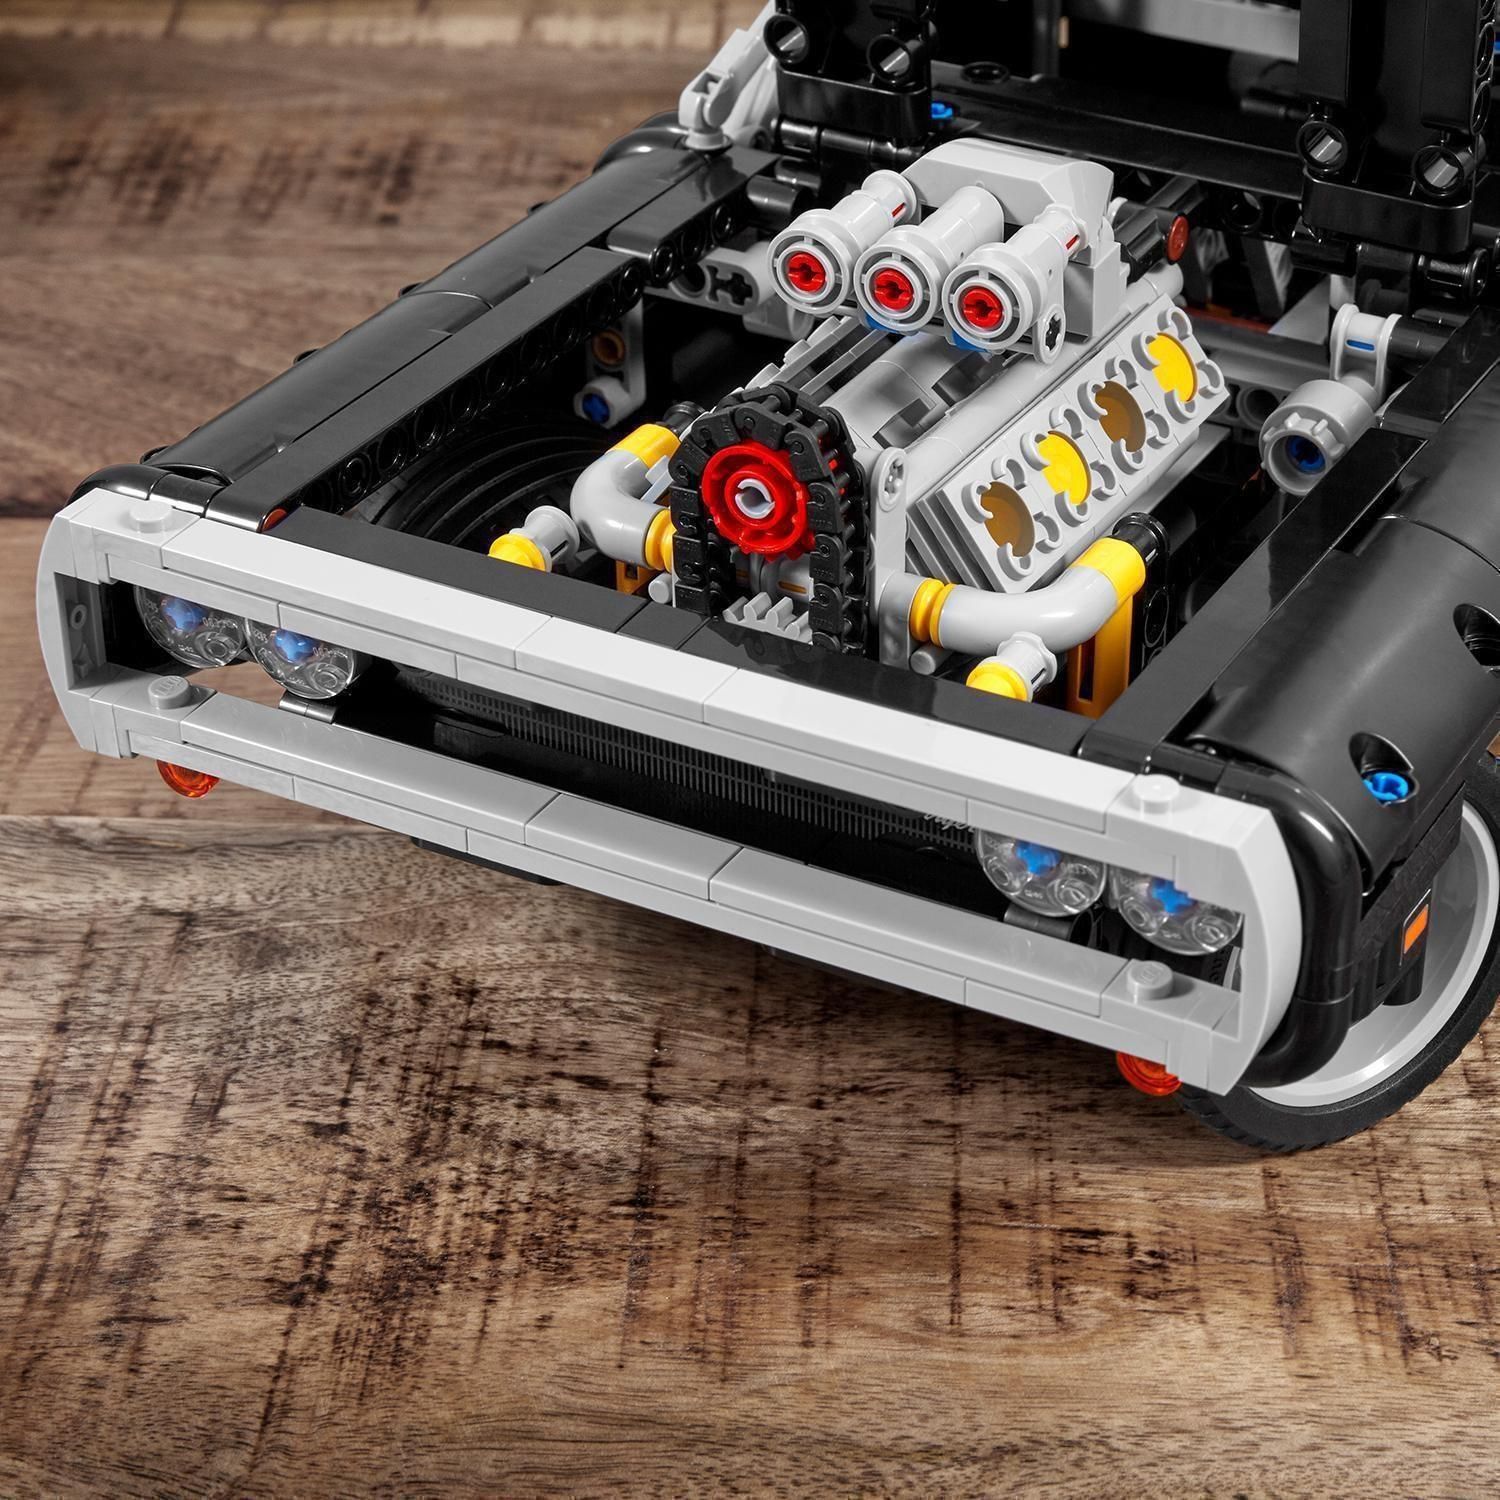 LEGO Technic 42111 Dom's Dodge Charger (Fast & Furious), l'annonce